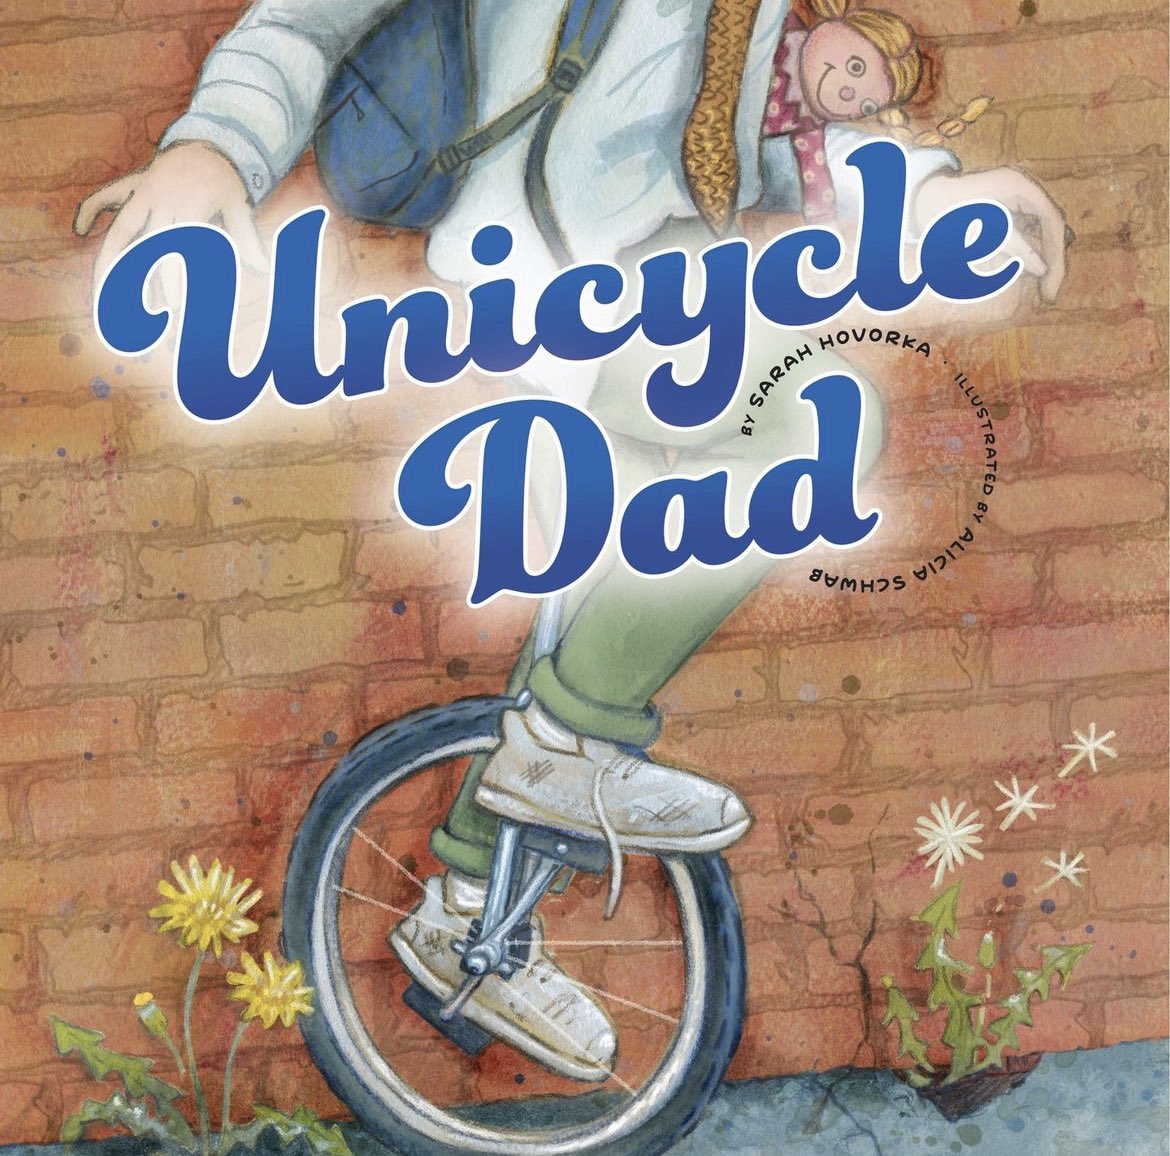 This story truly touched my heart! UNICYCLE DAD by @HovorkaSarah & @aschwabart follows a young single dad and his two young children as they navigate the pressures of poverty. This picture book celebrates resilience and a father’s love and devotion beautifully. A must-read! 💙